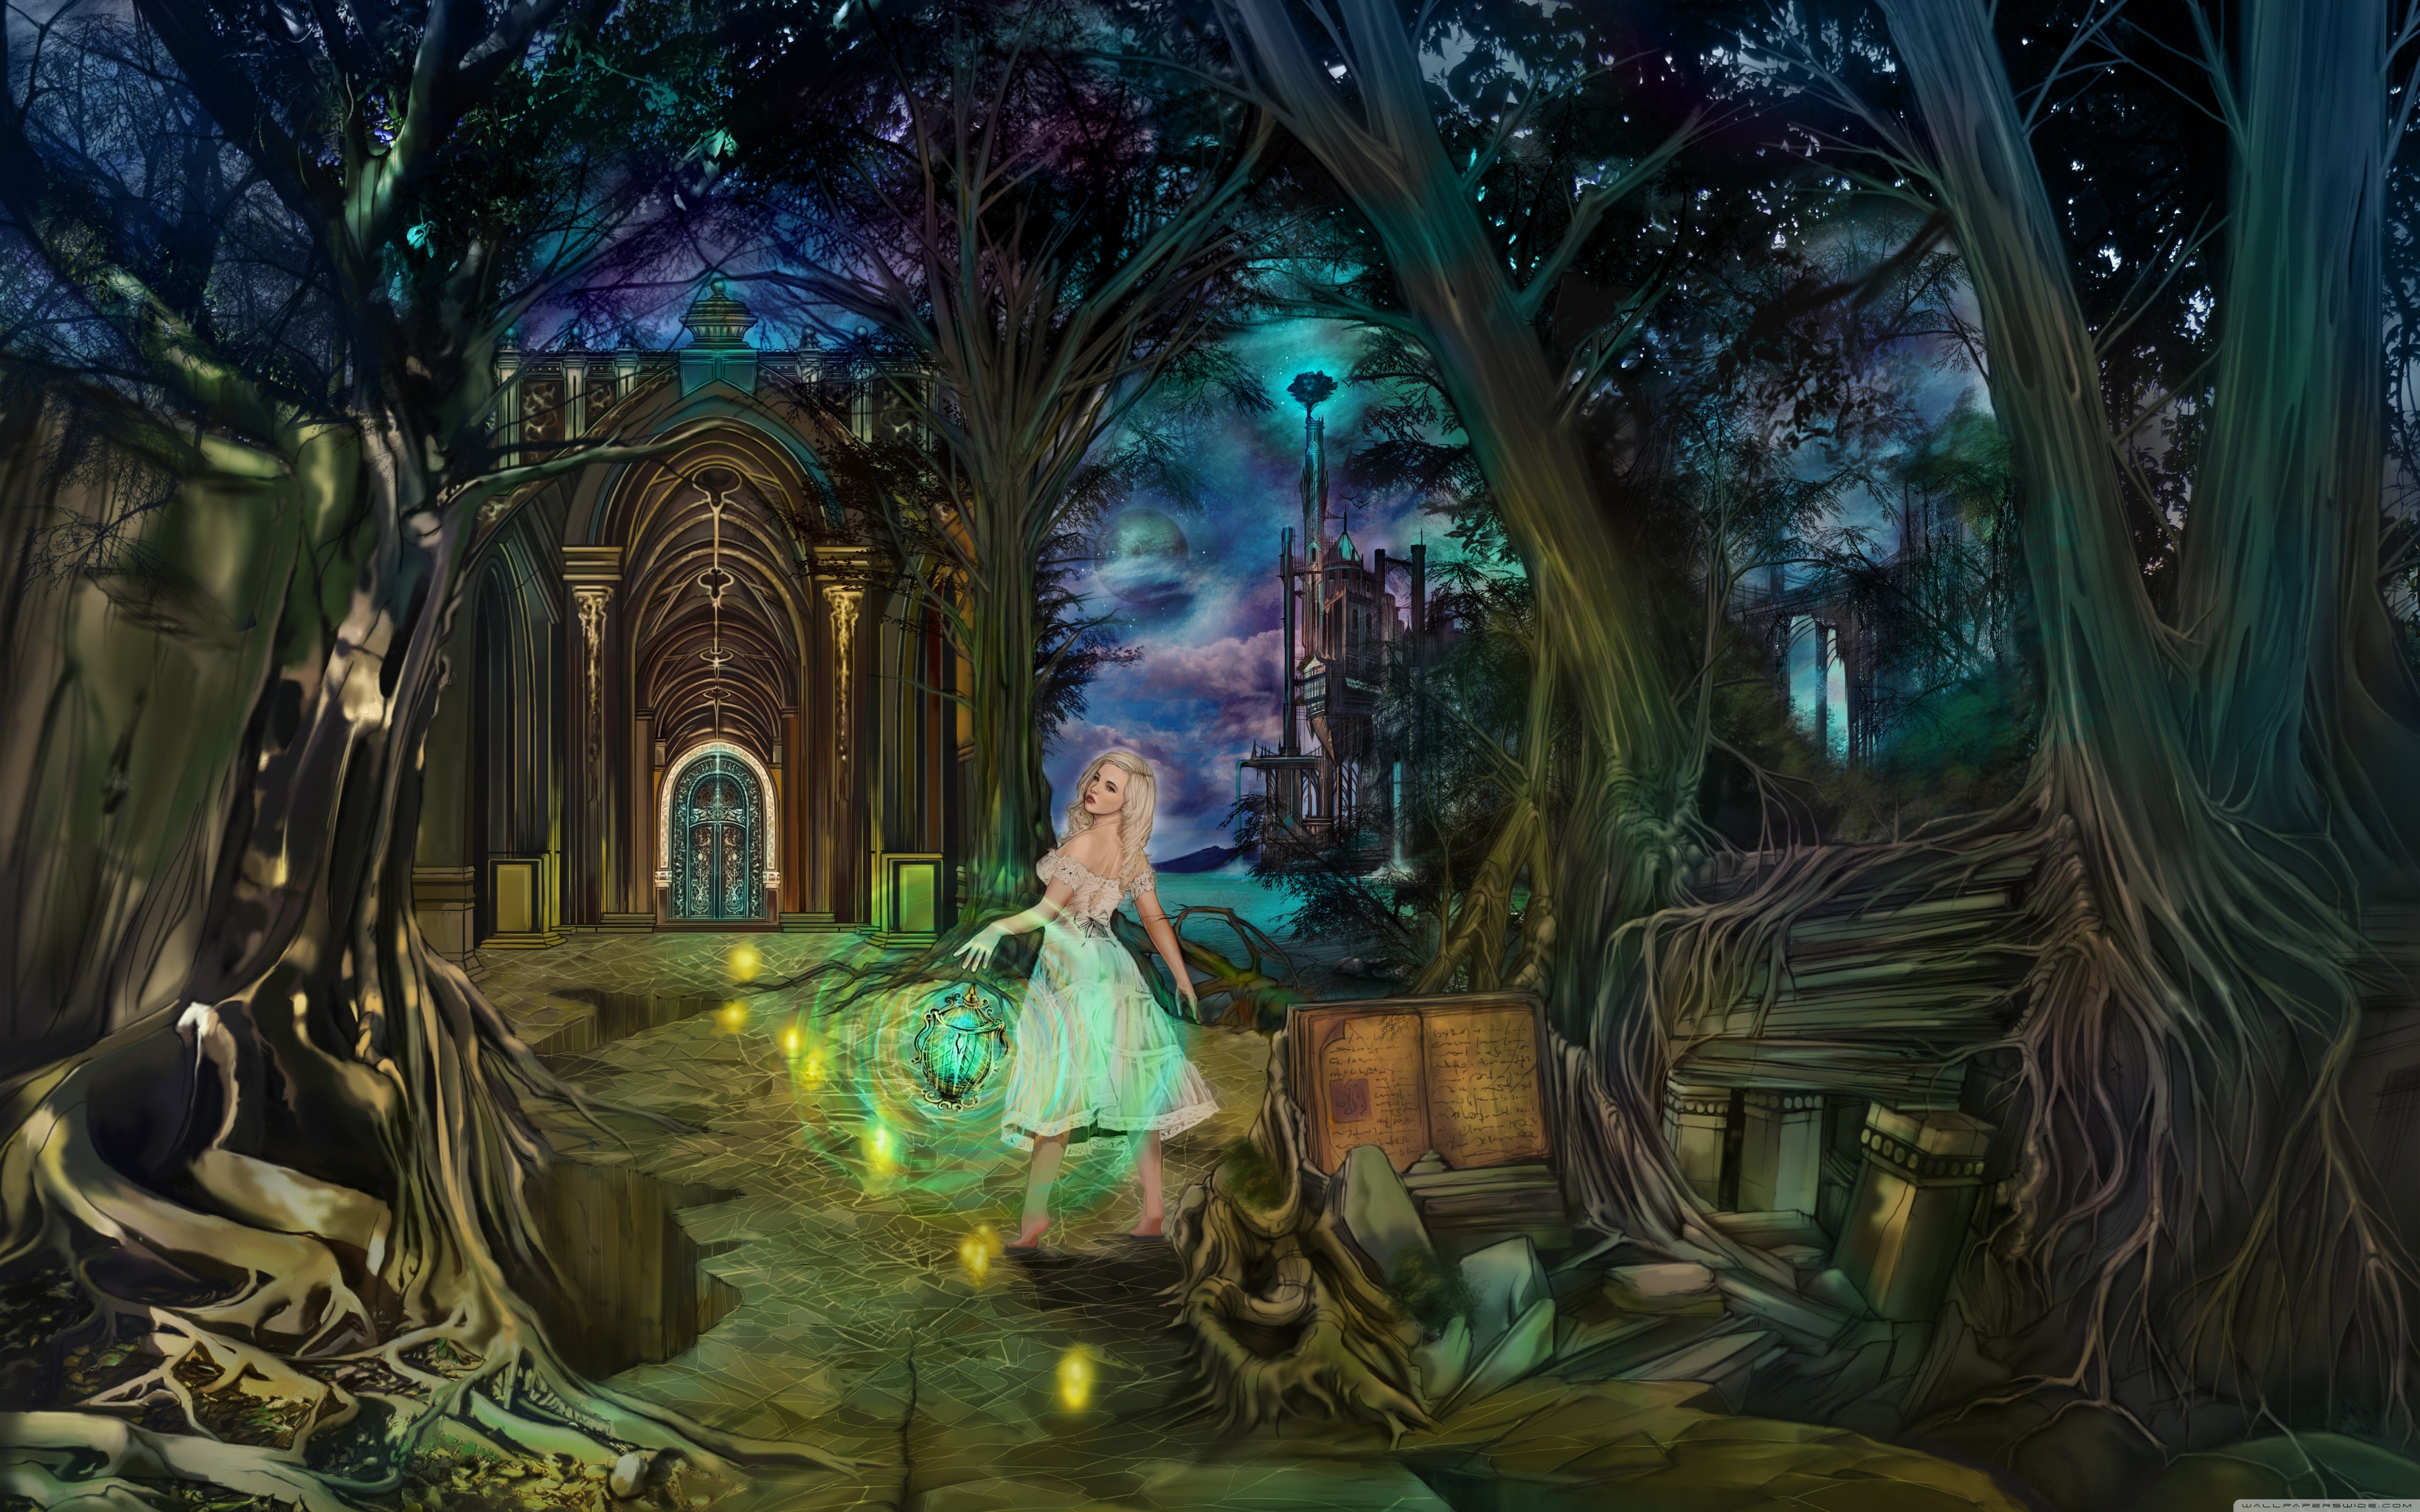 Download A Fairy Tale Princess Comes to Life | Wallpapers.com